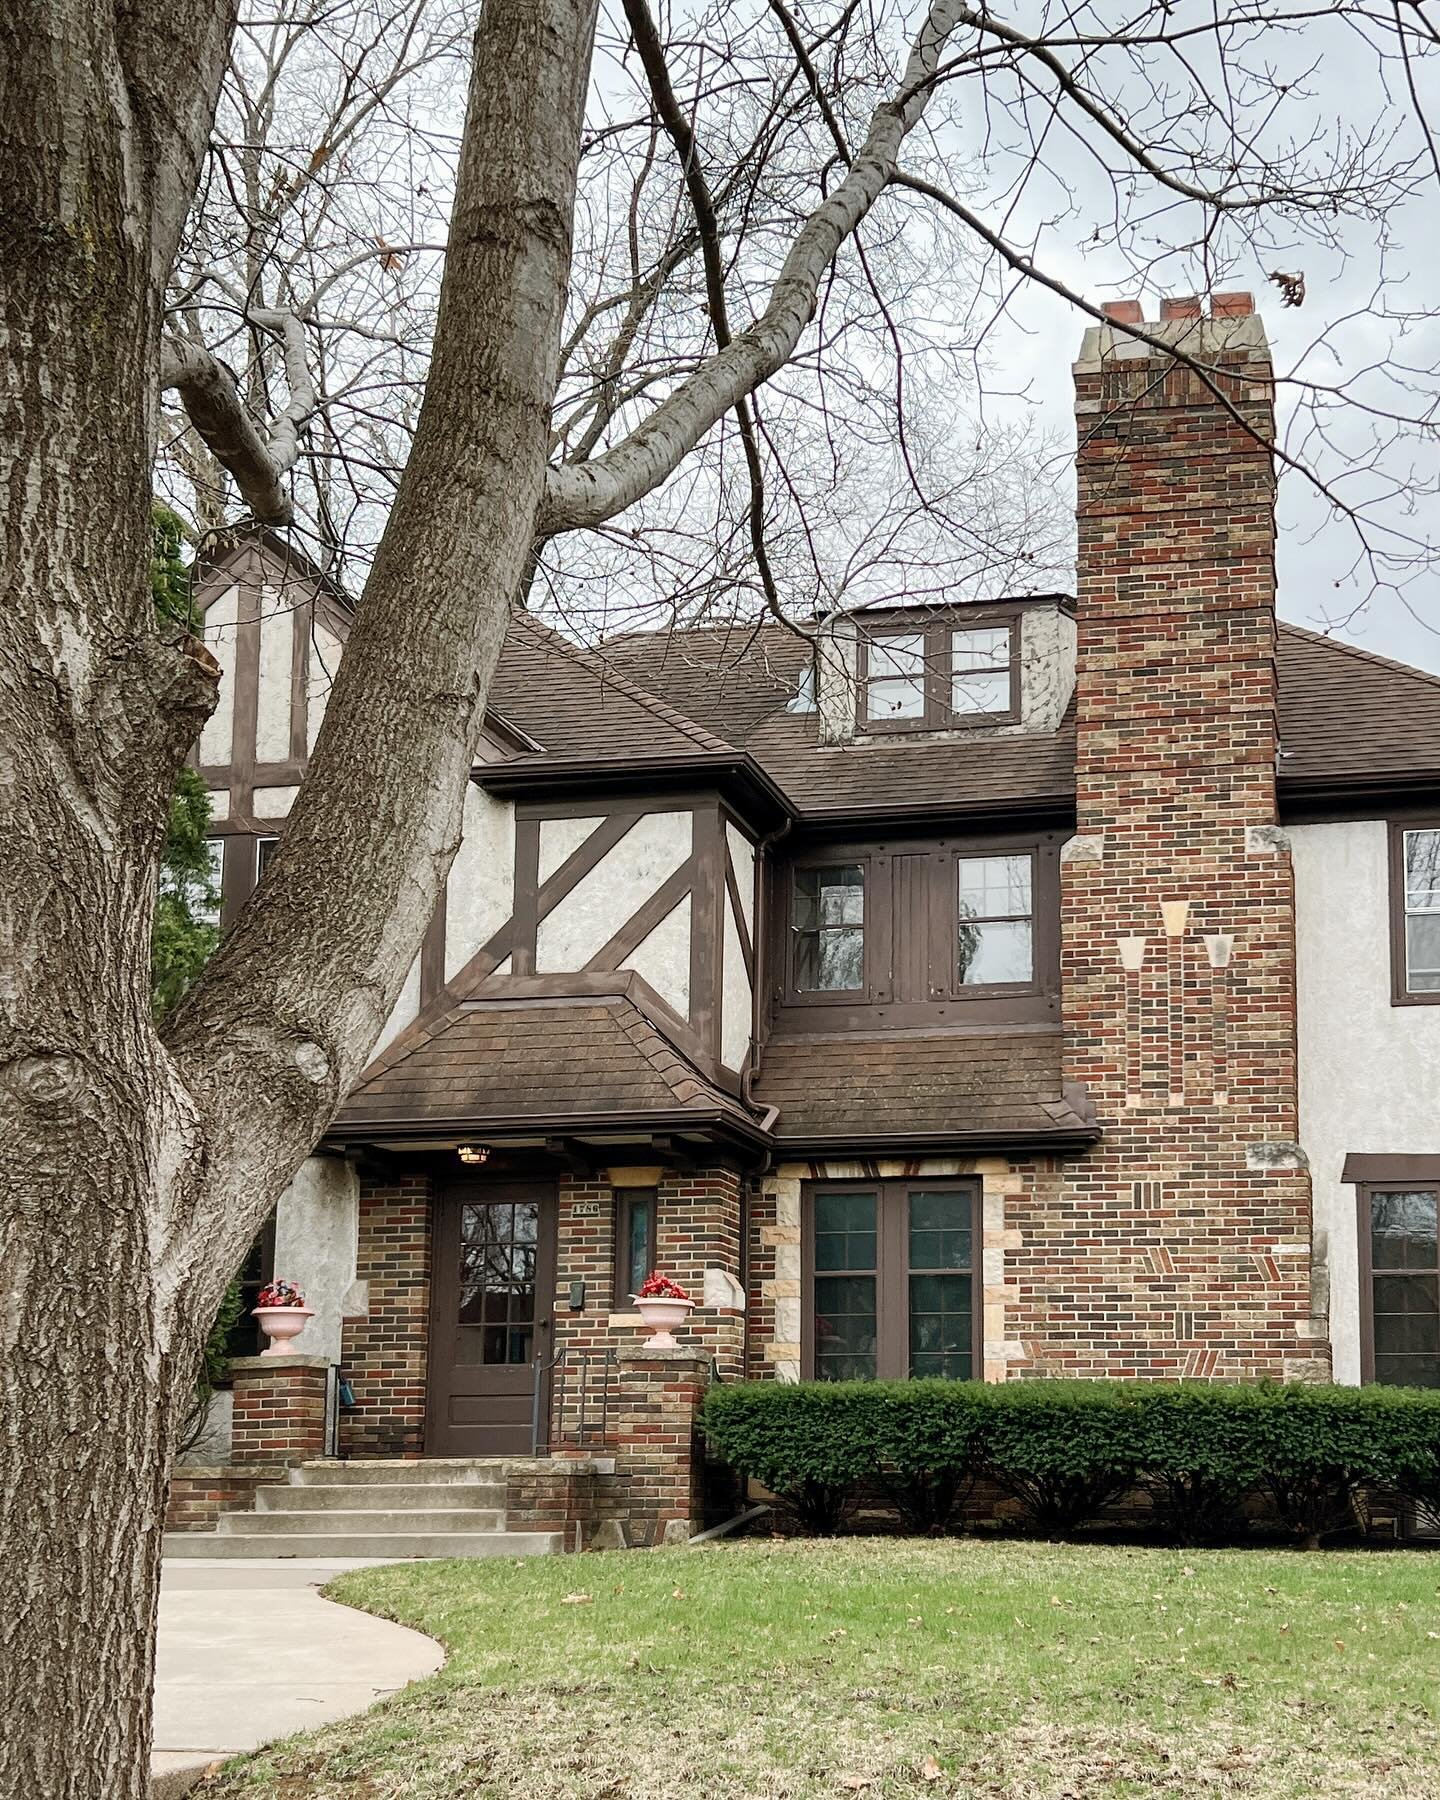 Its been 68 years since this 1932 Tudor has been for sale. So much of the original charm is screaming to be restored. The bathrooms are glorious. A dream home!

Interested in finding your own home to love? Fill out my &lsquo;buy with me&rsquo; contac